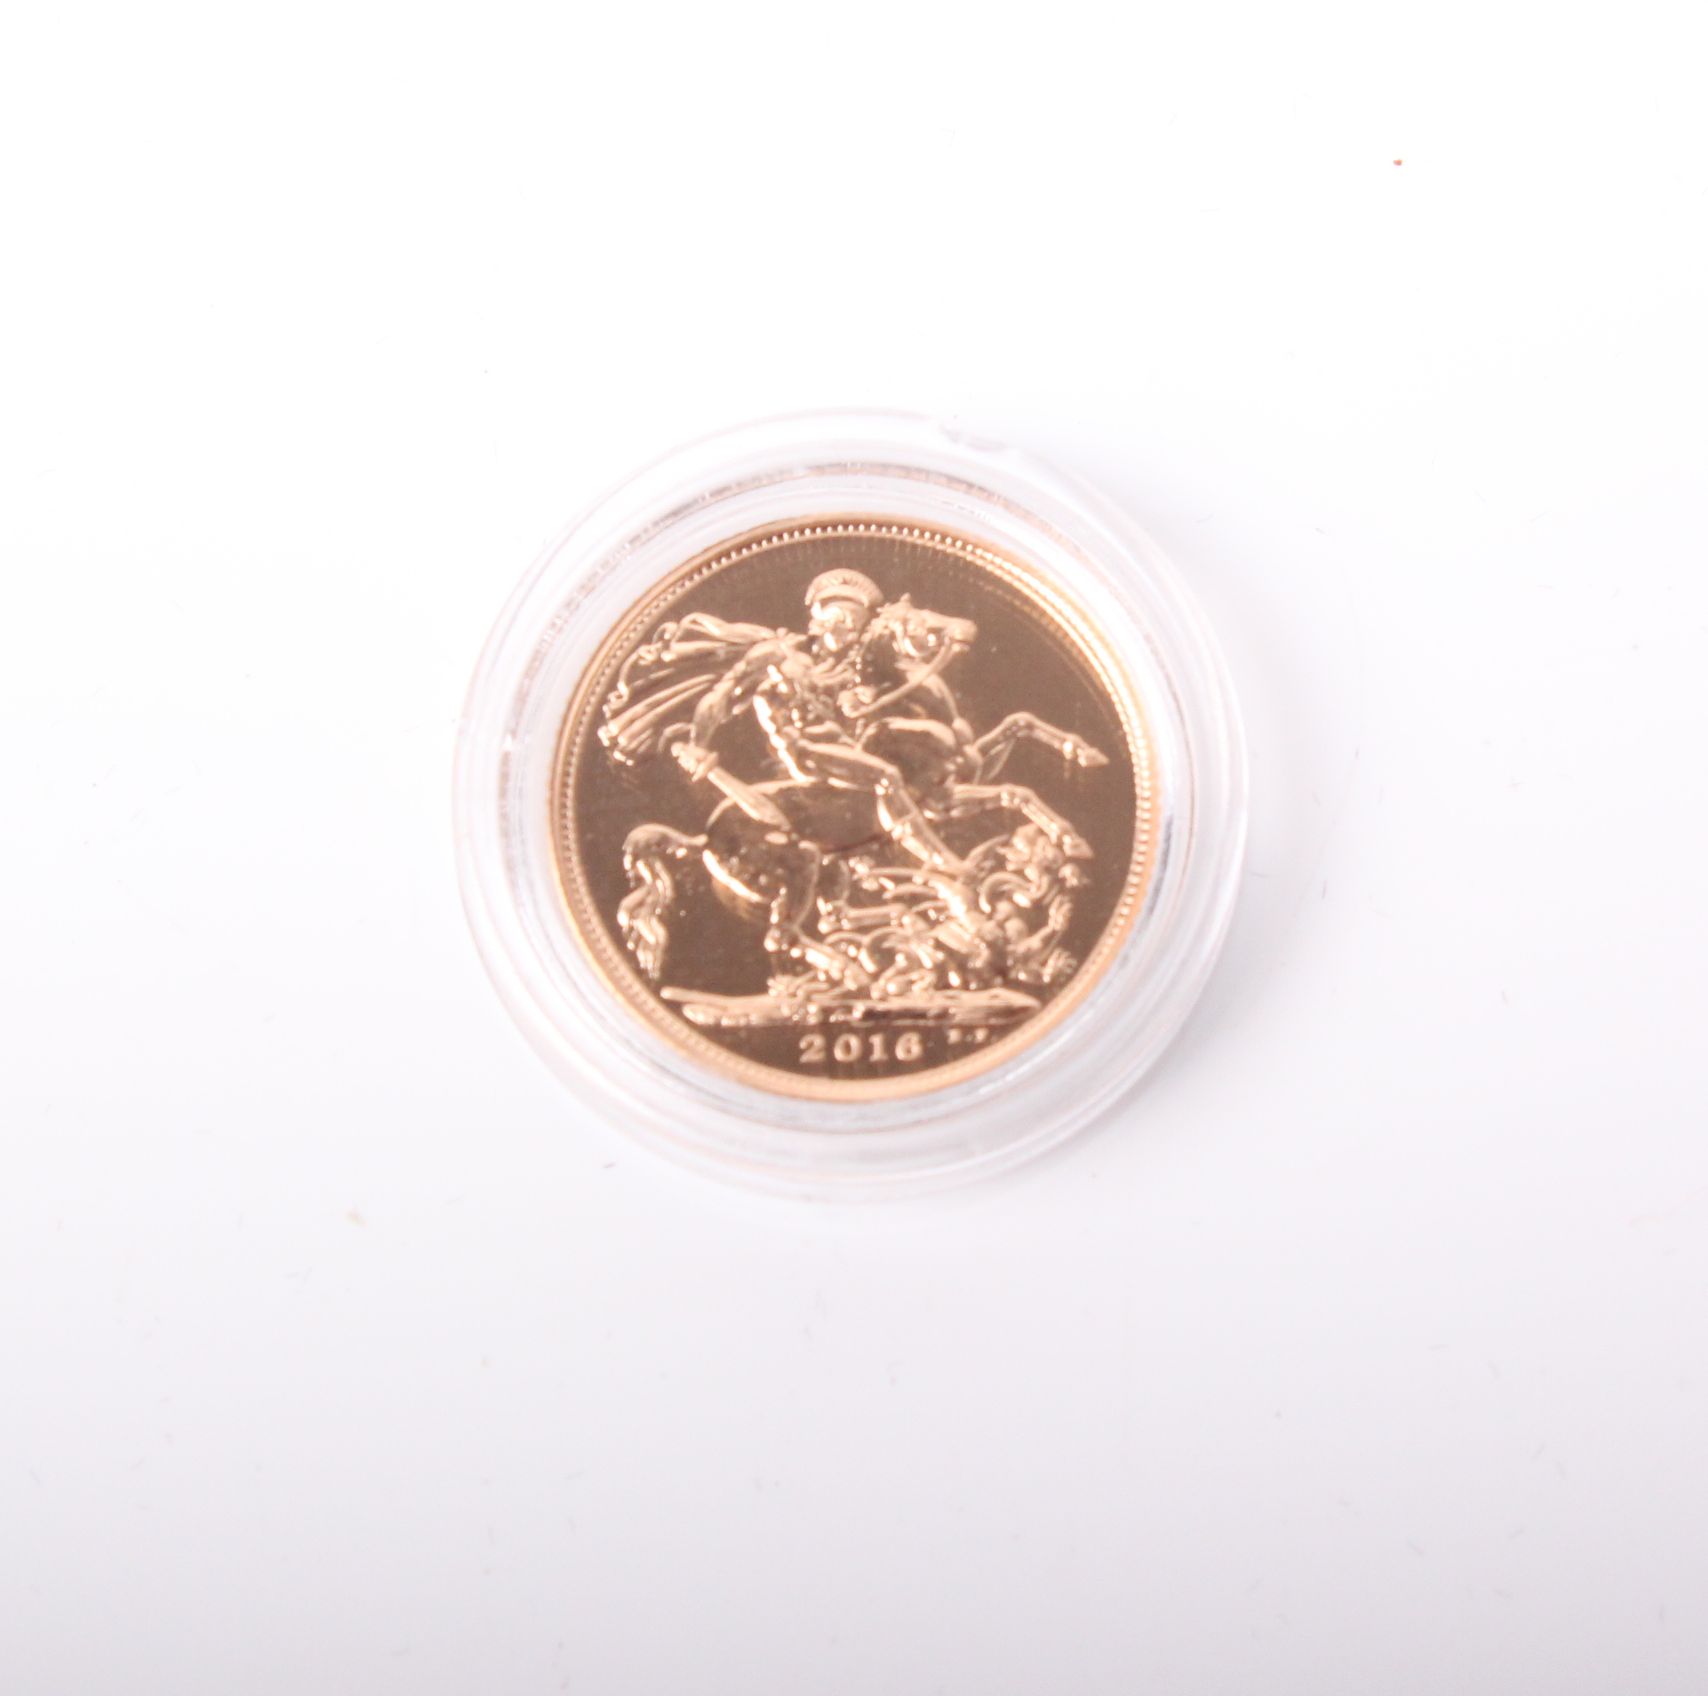 Proof 2016 gold proof sovereign, weight 7.98 grams. Encapsulated with certificate